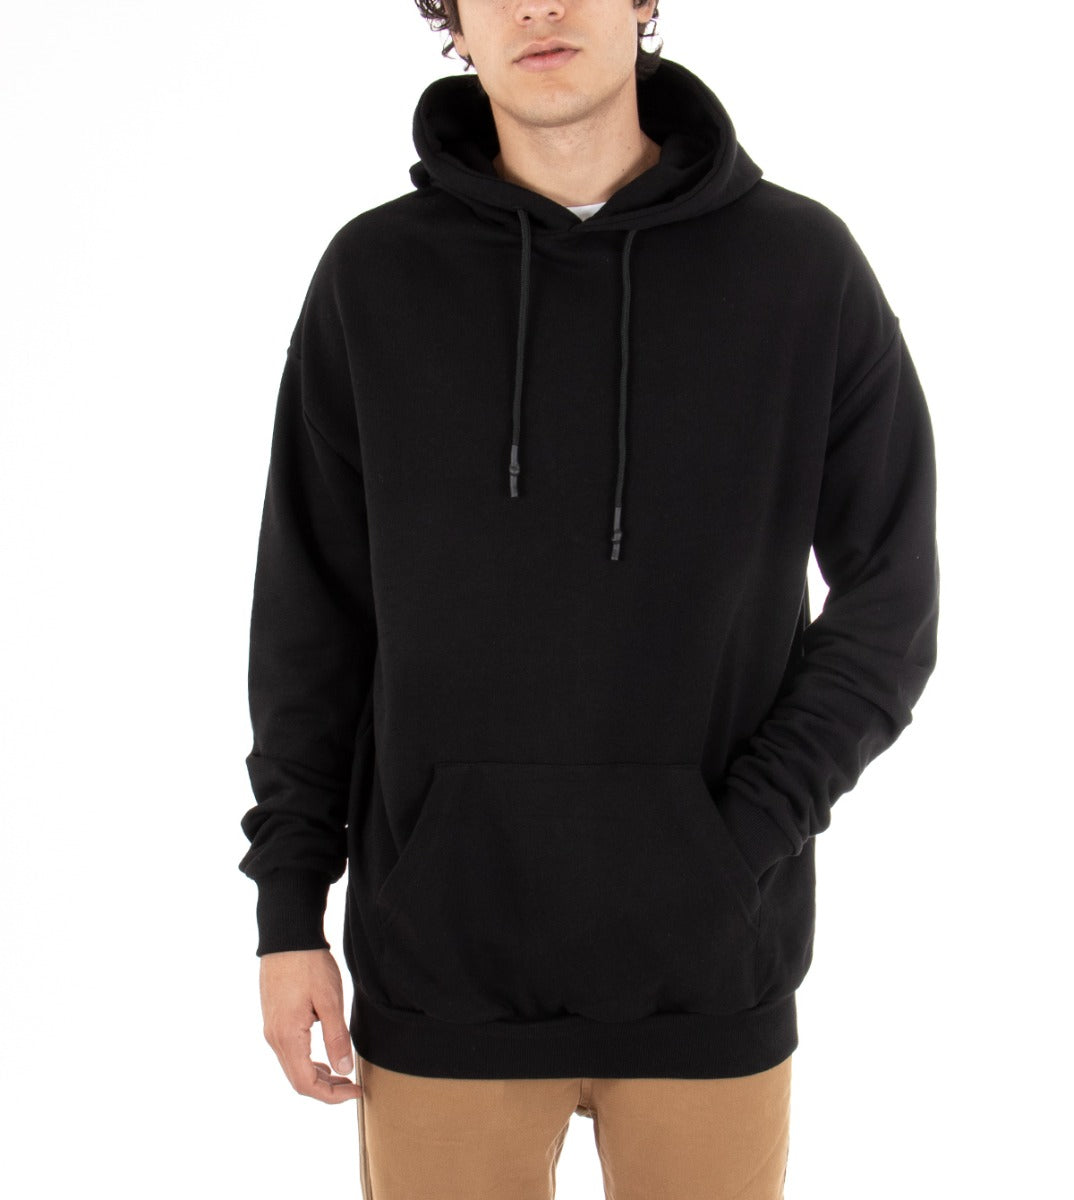 Men's Sweatshirt With Black Hood Oversized Basic Knit Solid Color GIOSAL-F2735A